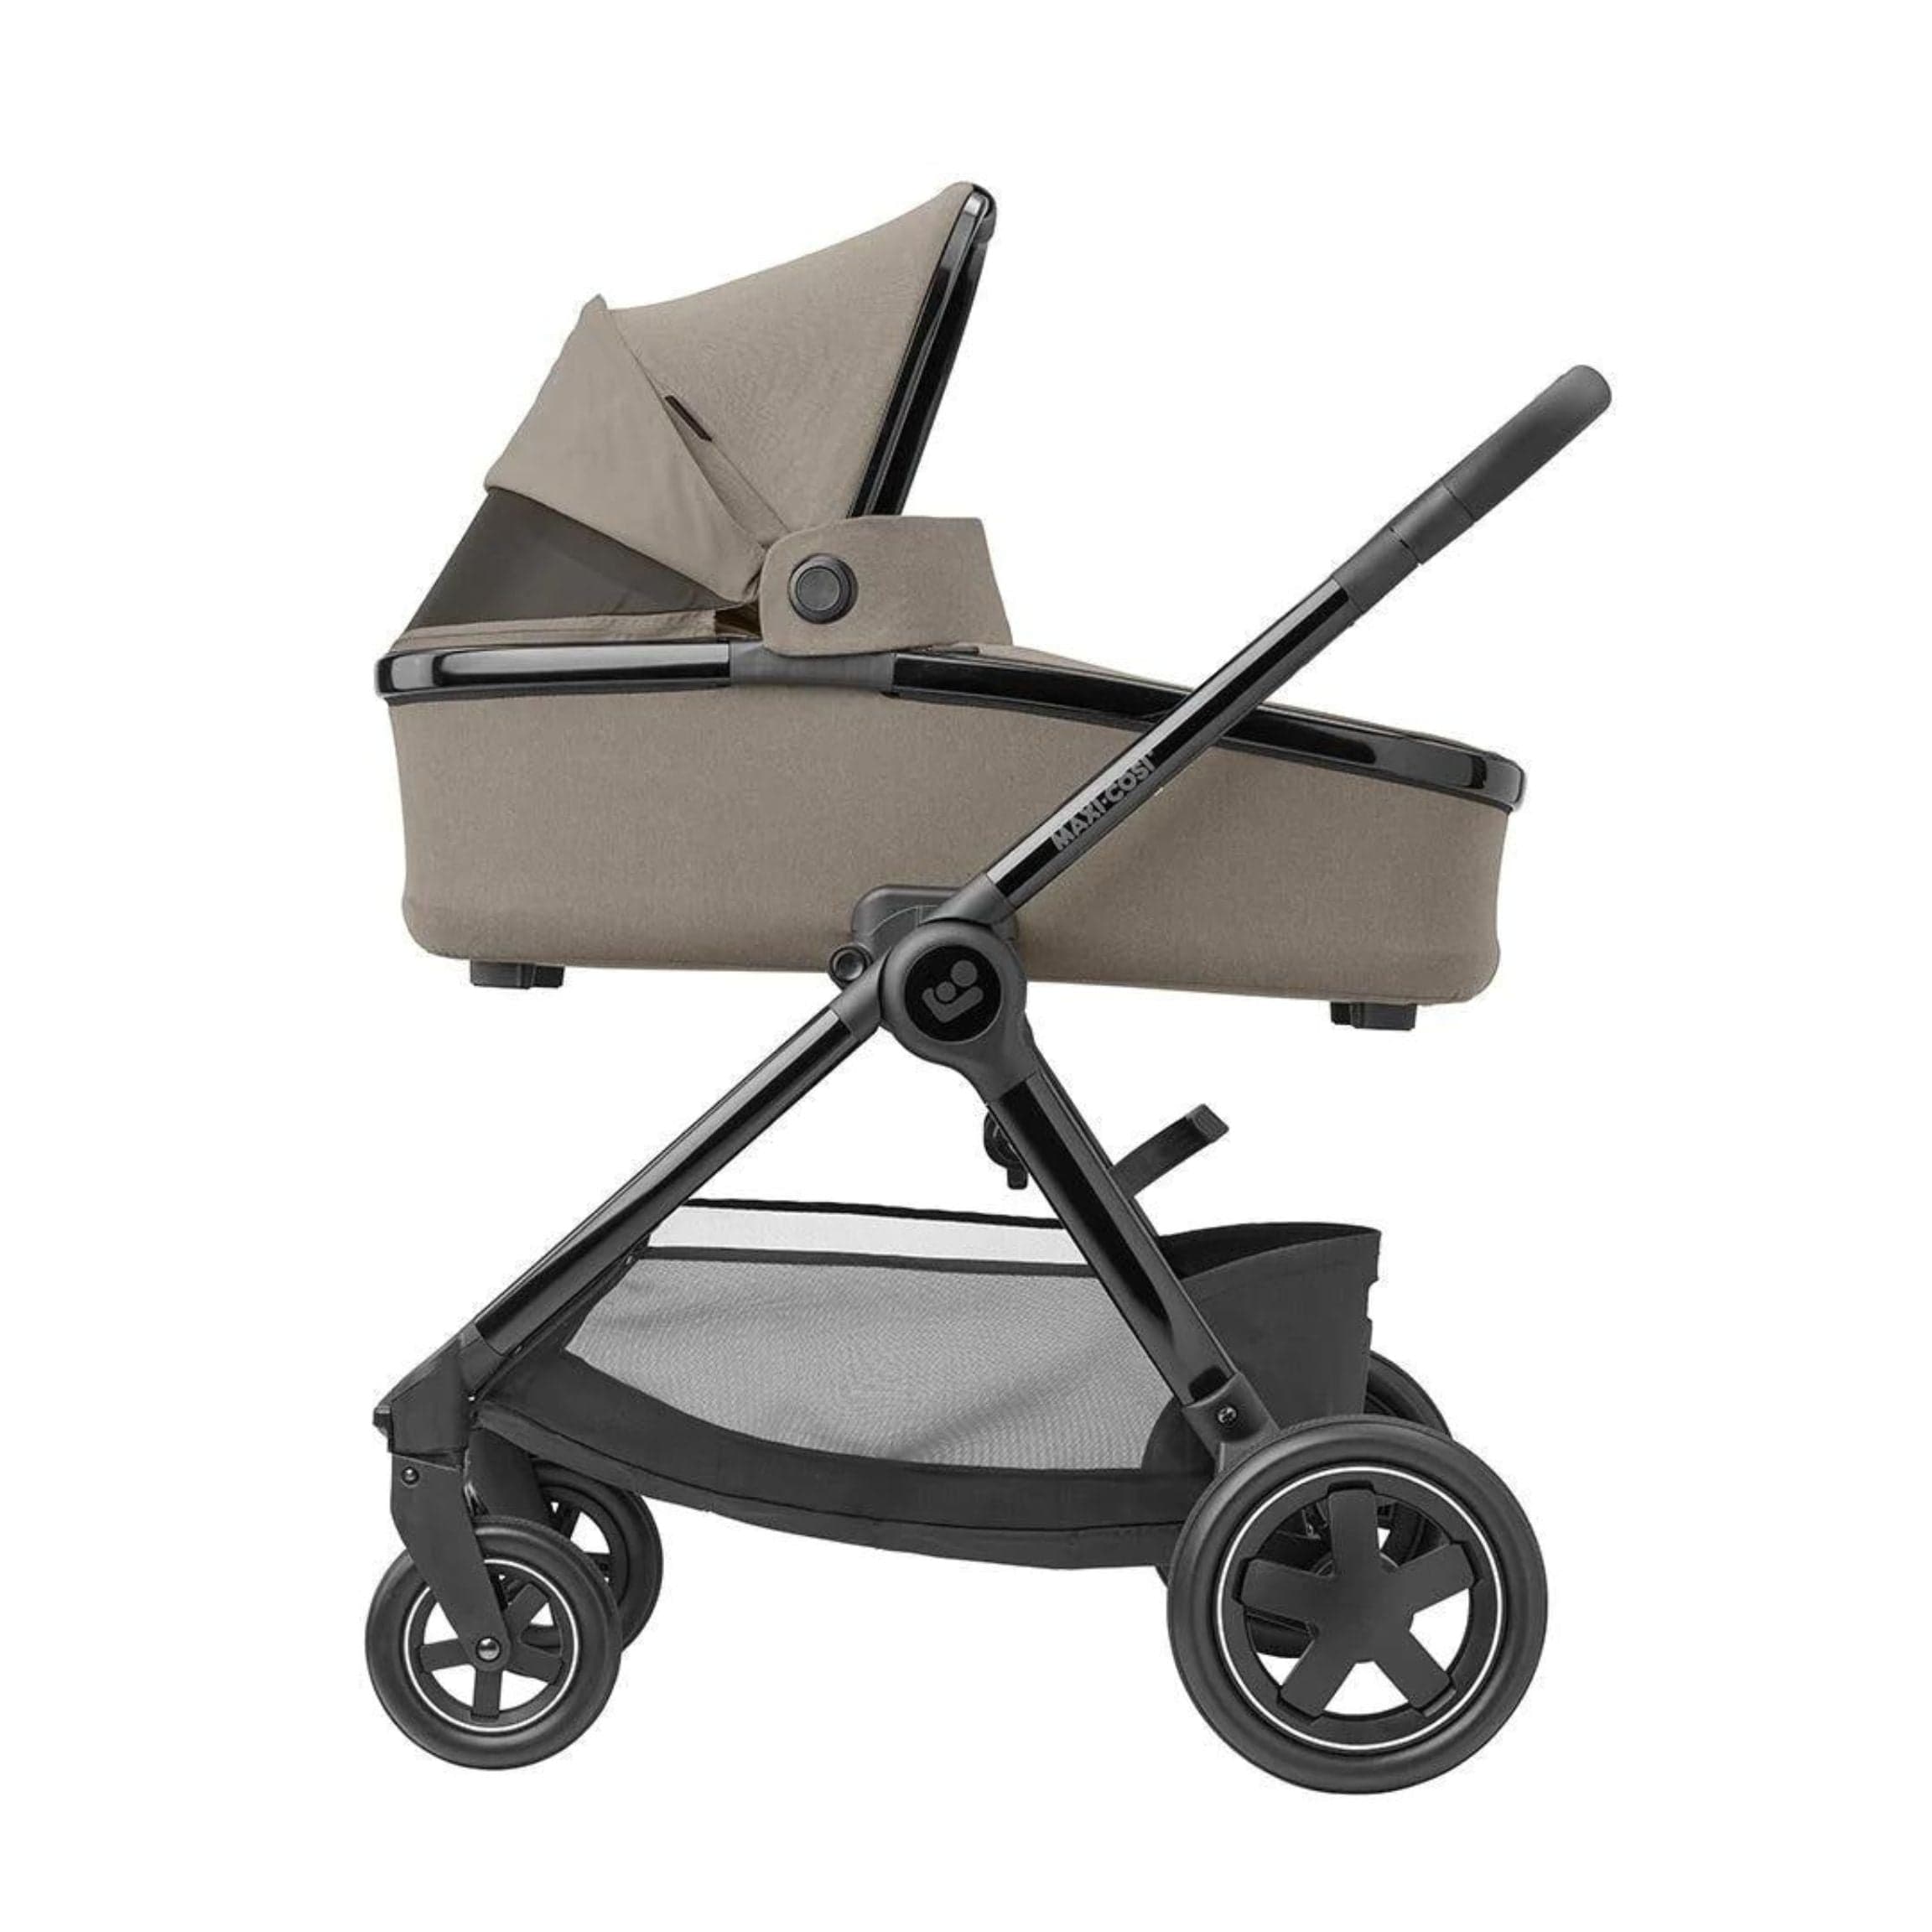 Maxi-Cosi Adorra Luxe Pebble 360 Travel System in Twillic Truffle Travel Systems KF44300000 3220660337989